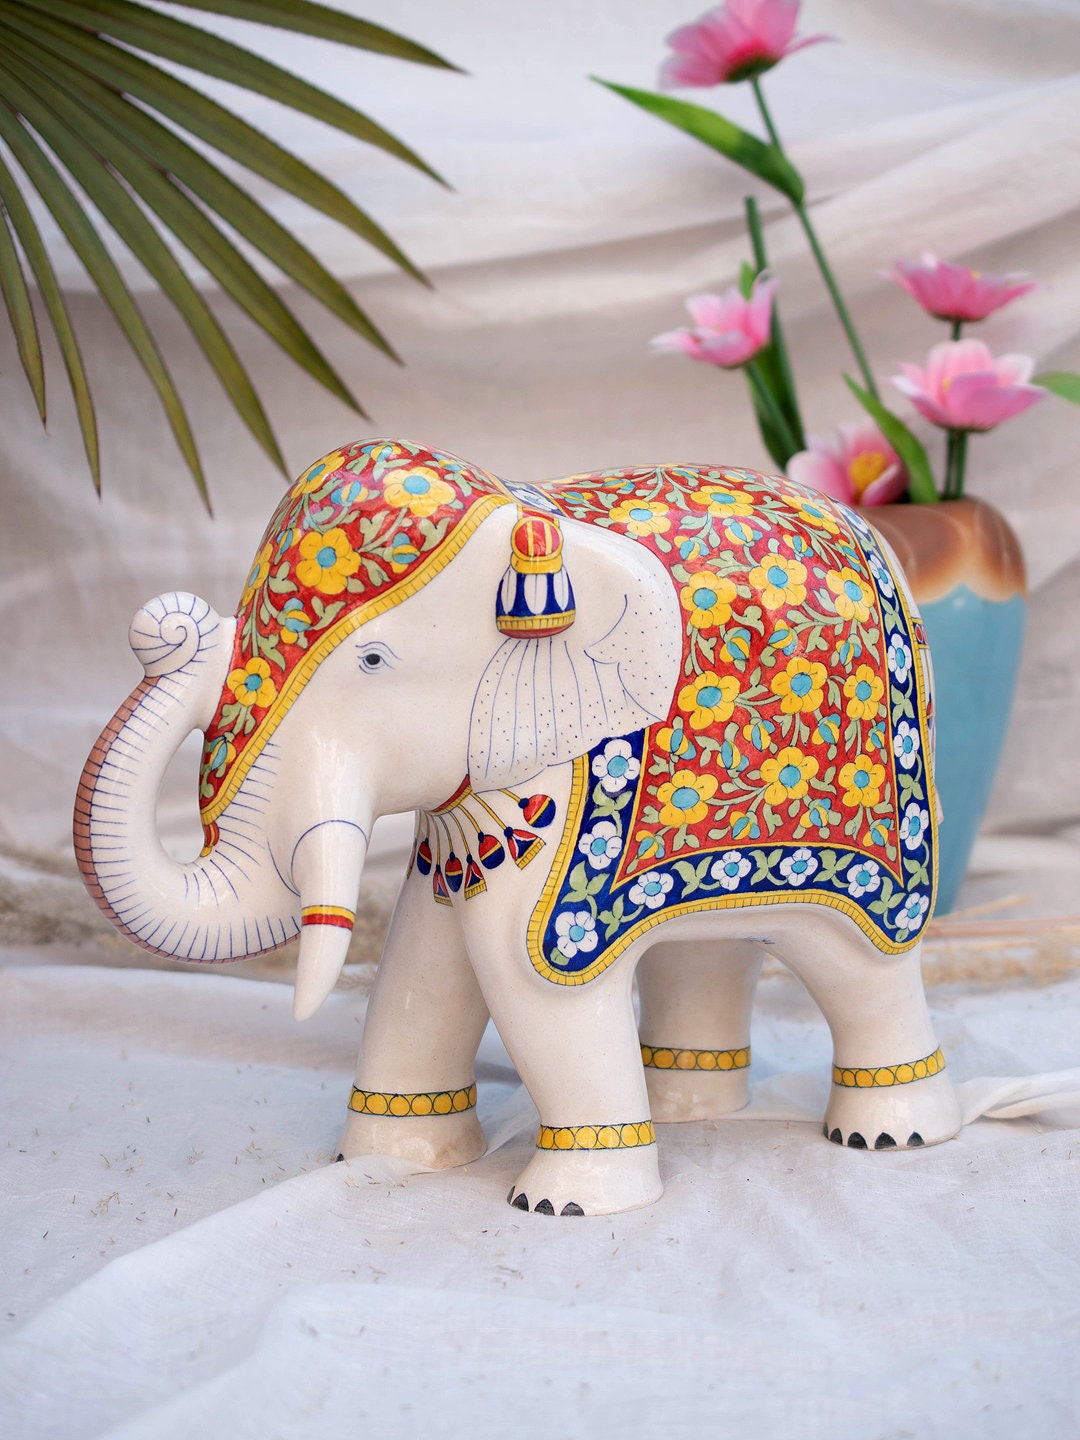 ZJ Whoest Elephant Statue. Gold Elephant Decor Brings Good Luck, Health,  Strength. Elephant Gifts for Women, Mom Gifts. Decorations